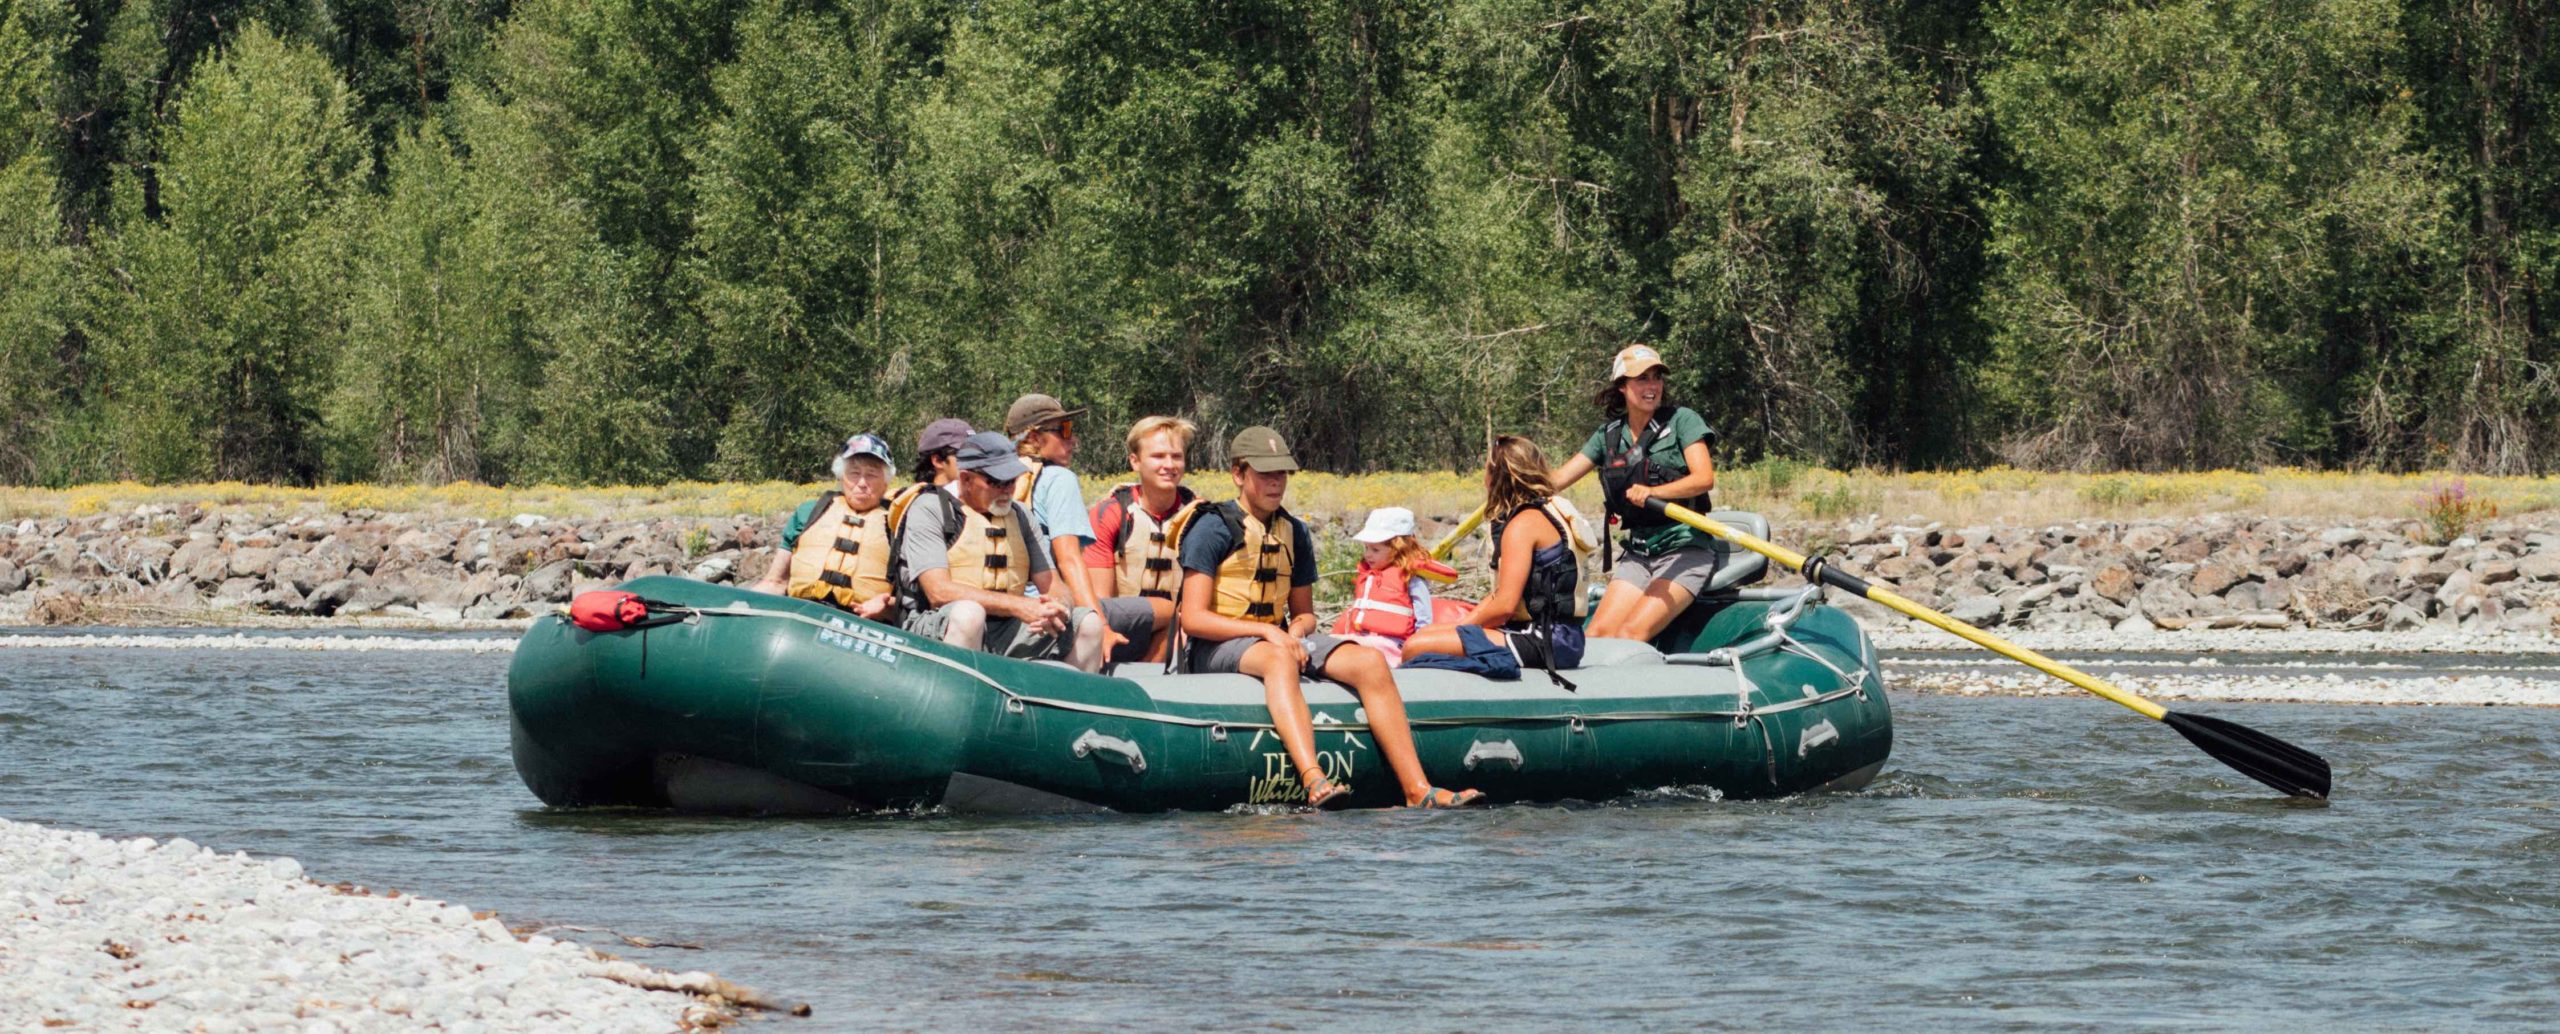 A raft guide floats down the Snake River with 8 passengers